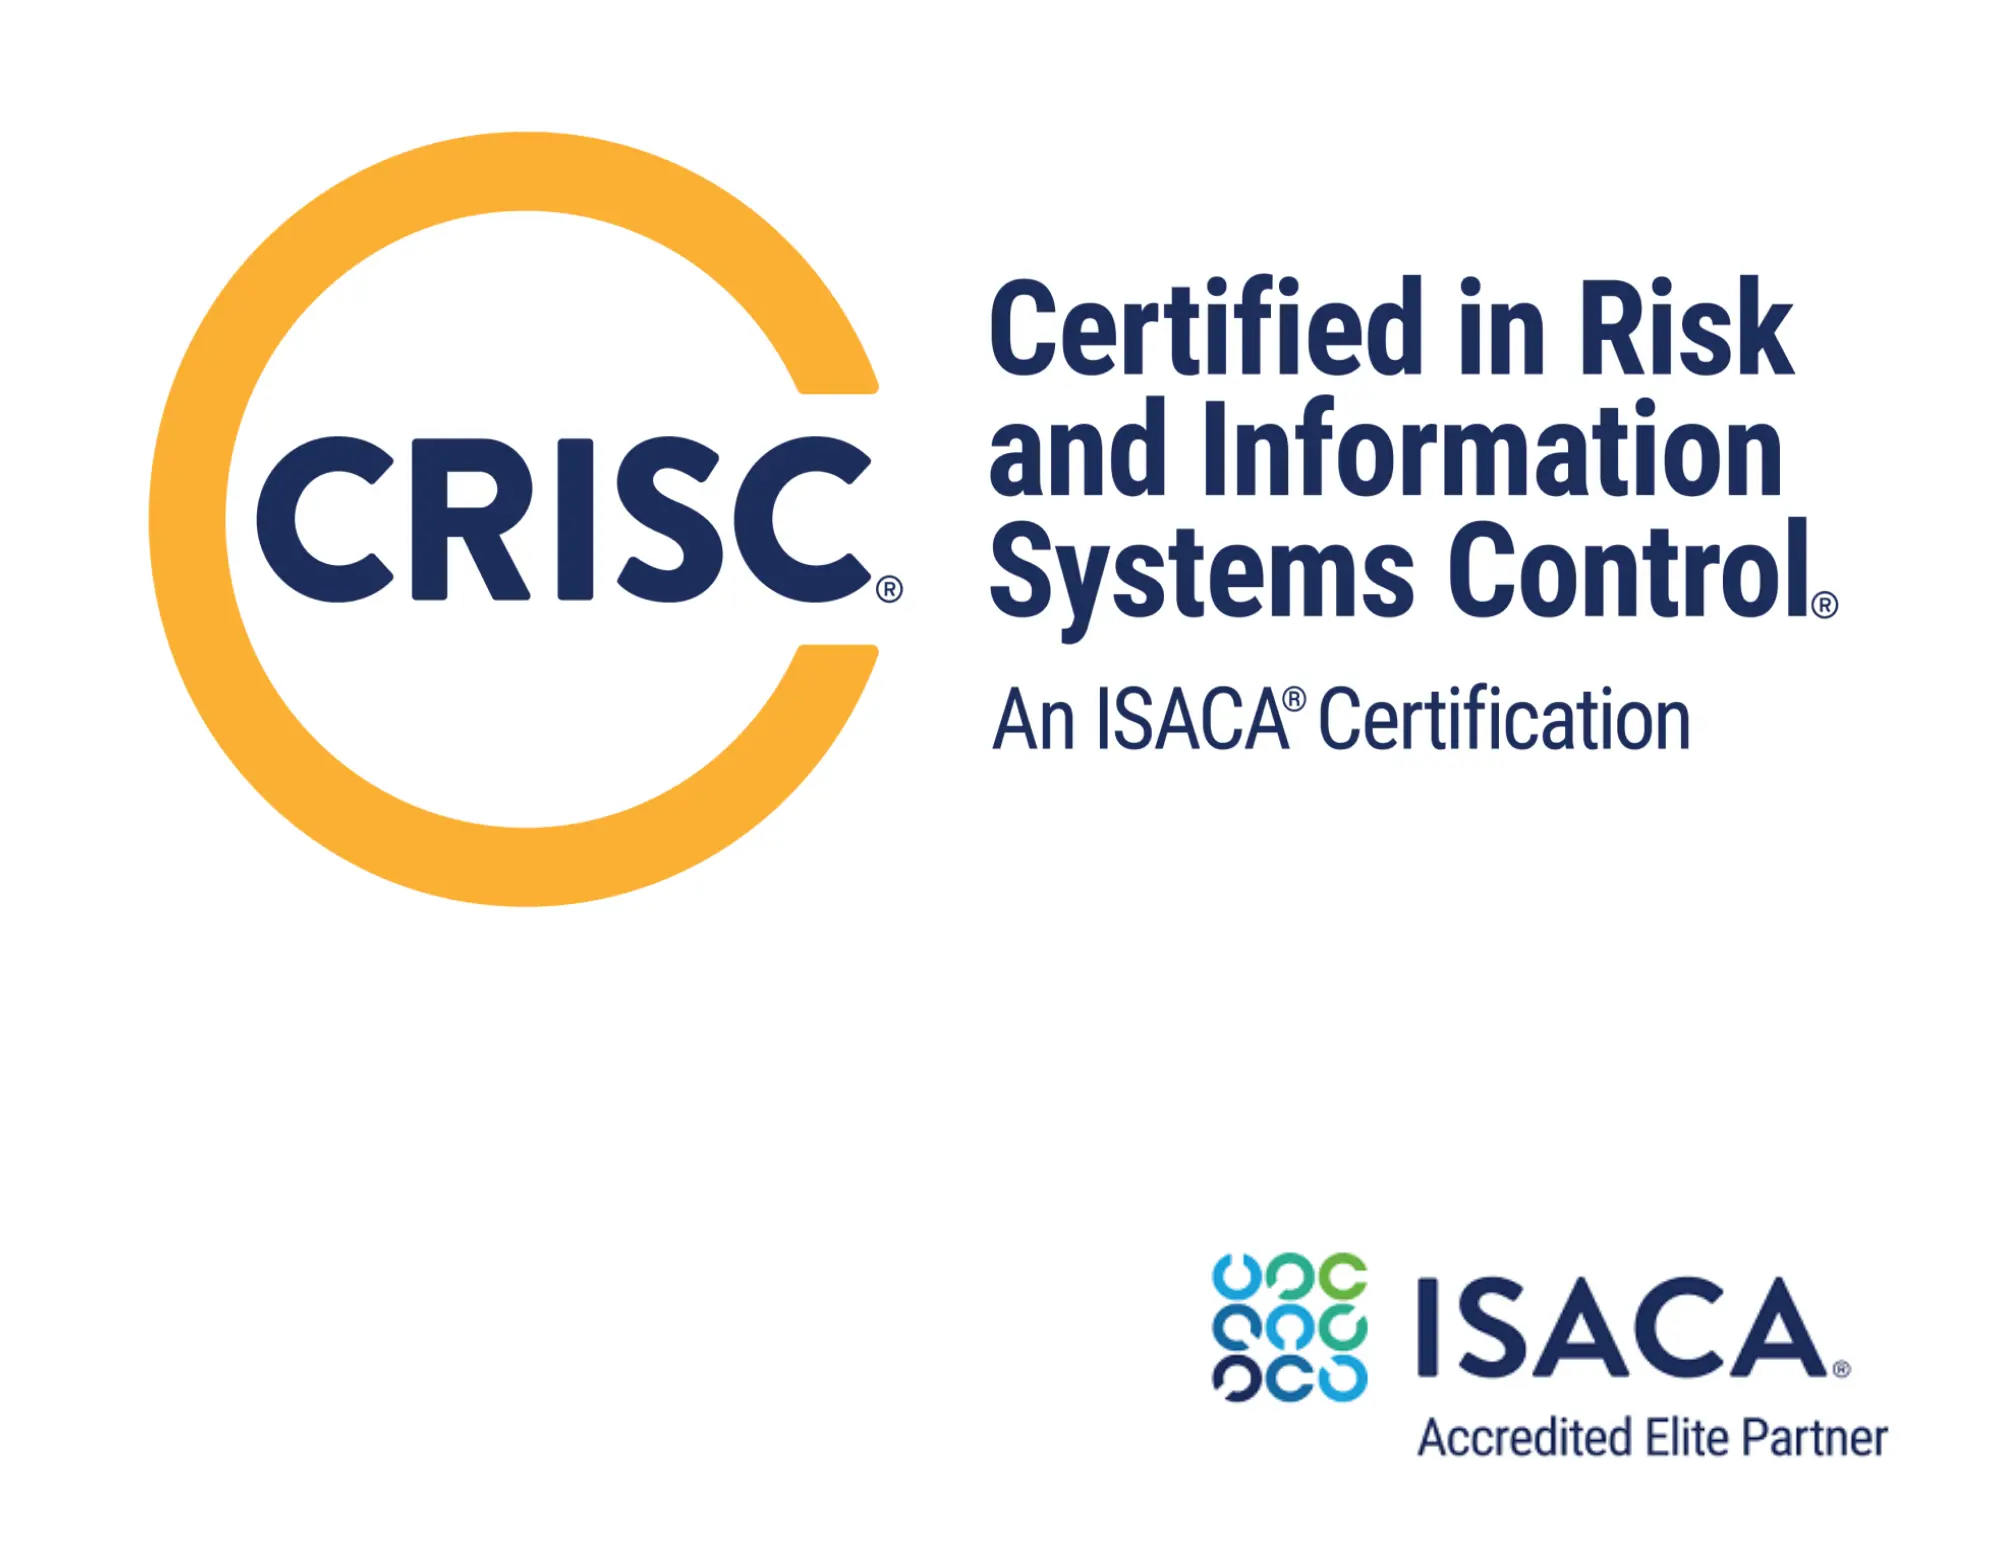 CRISC Certification badge achieved after attending CRISC Certified in Risk and Information Systems Control Certification Course